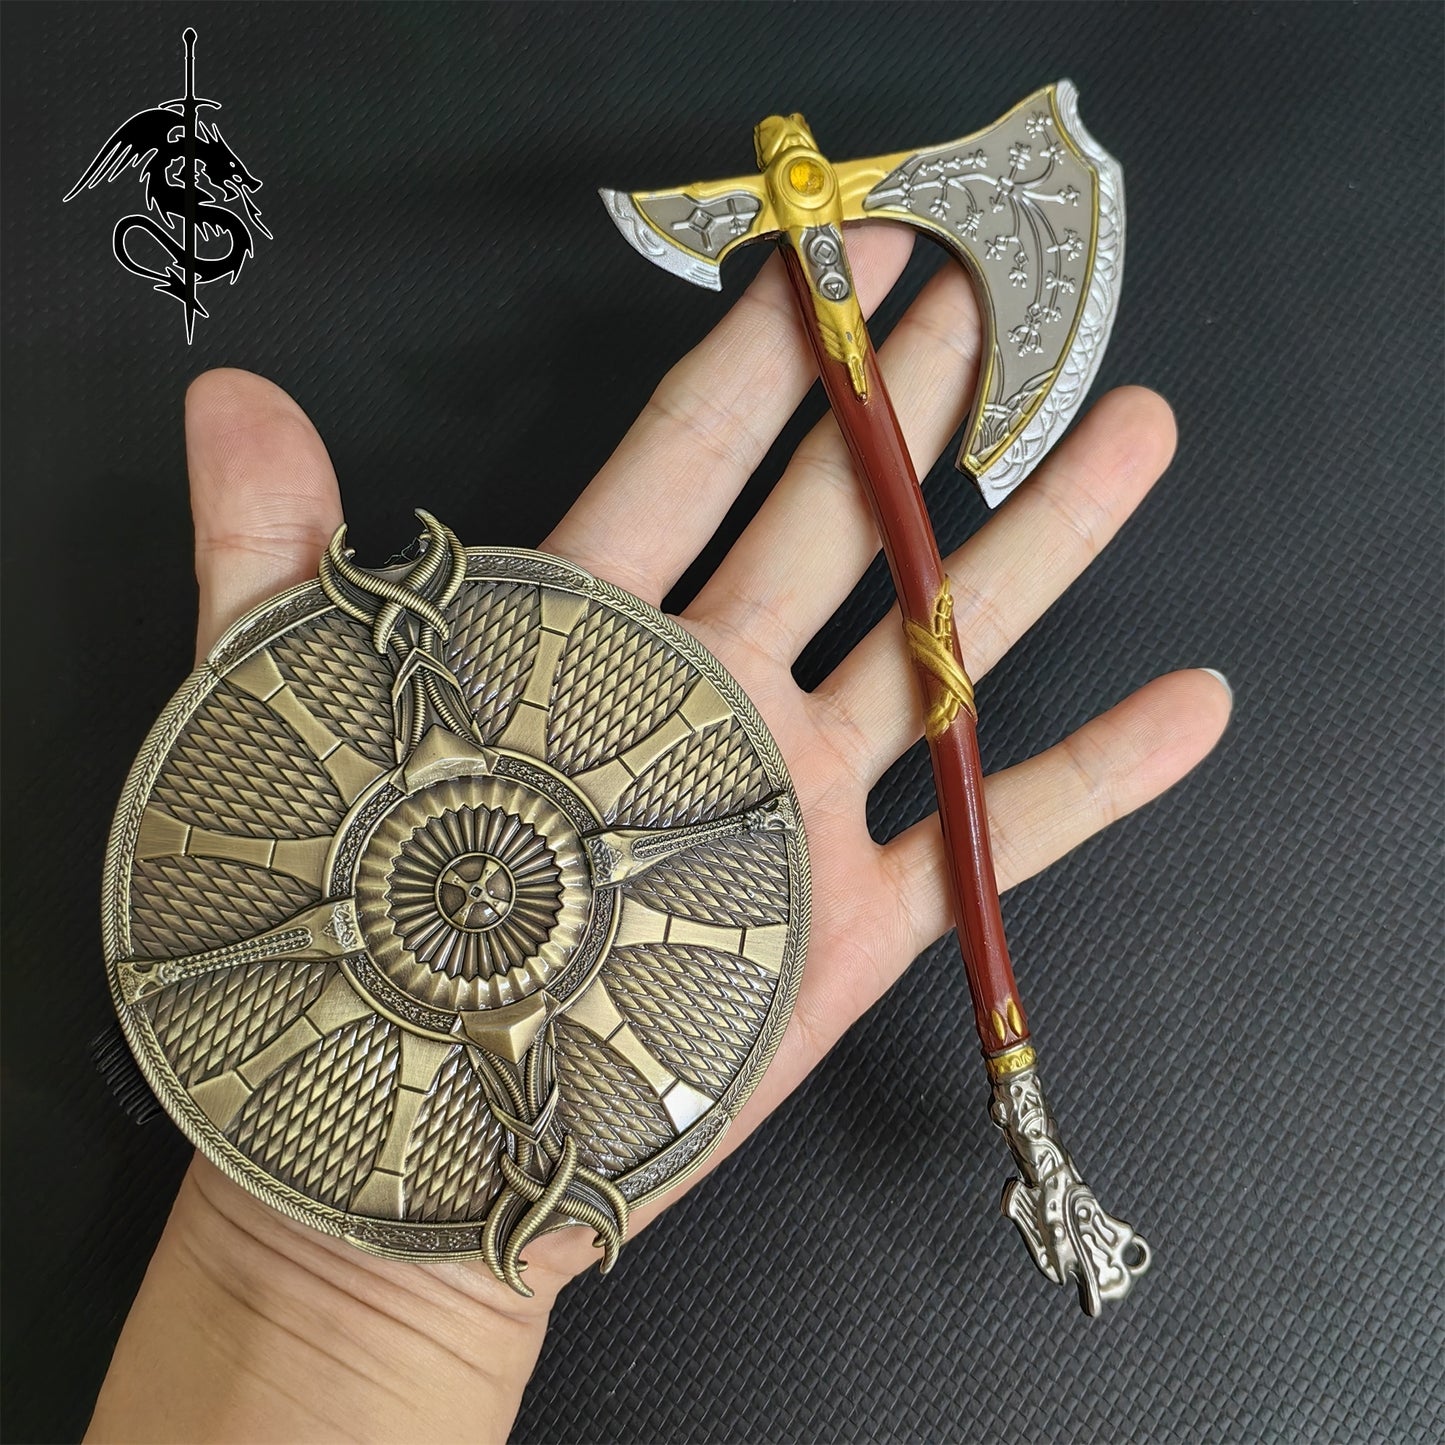 Metal Kratos Leviathan Axe Guardian Shield 2 in 1 Pack